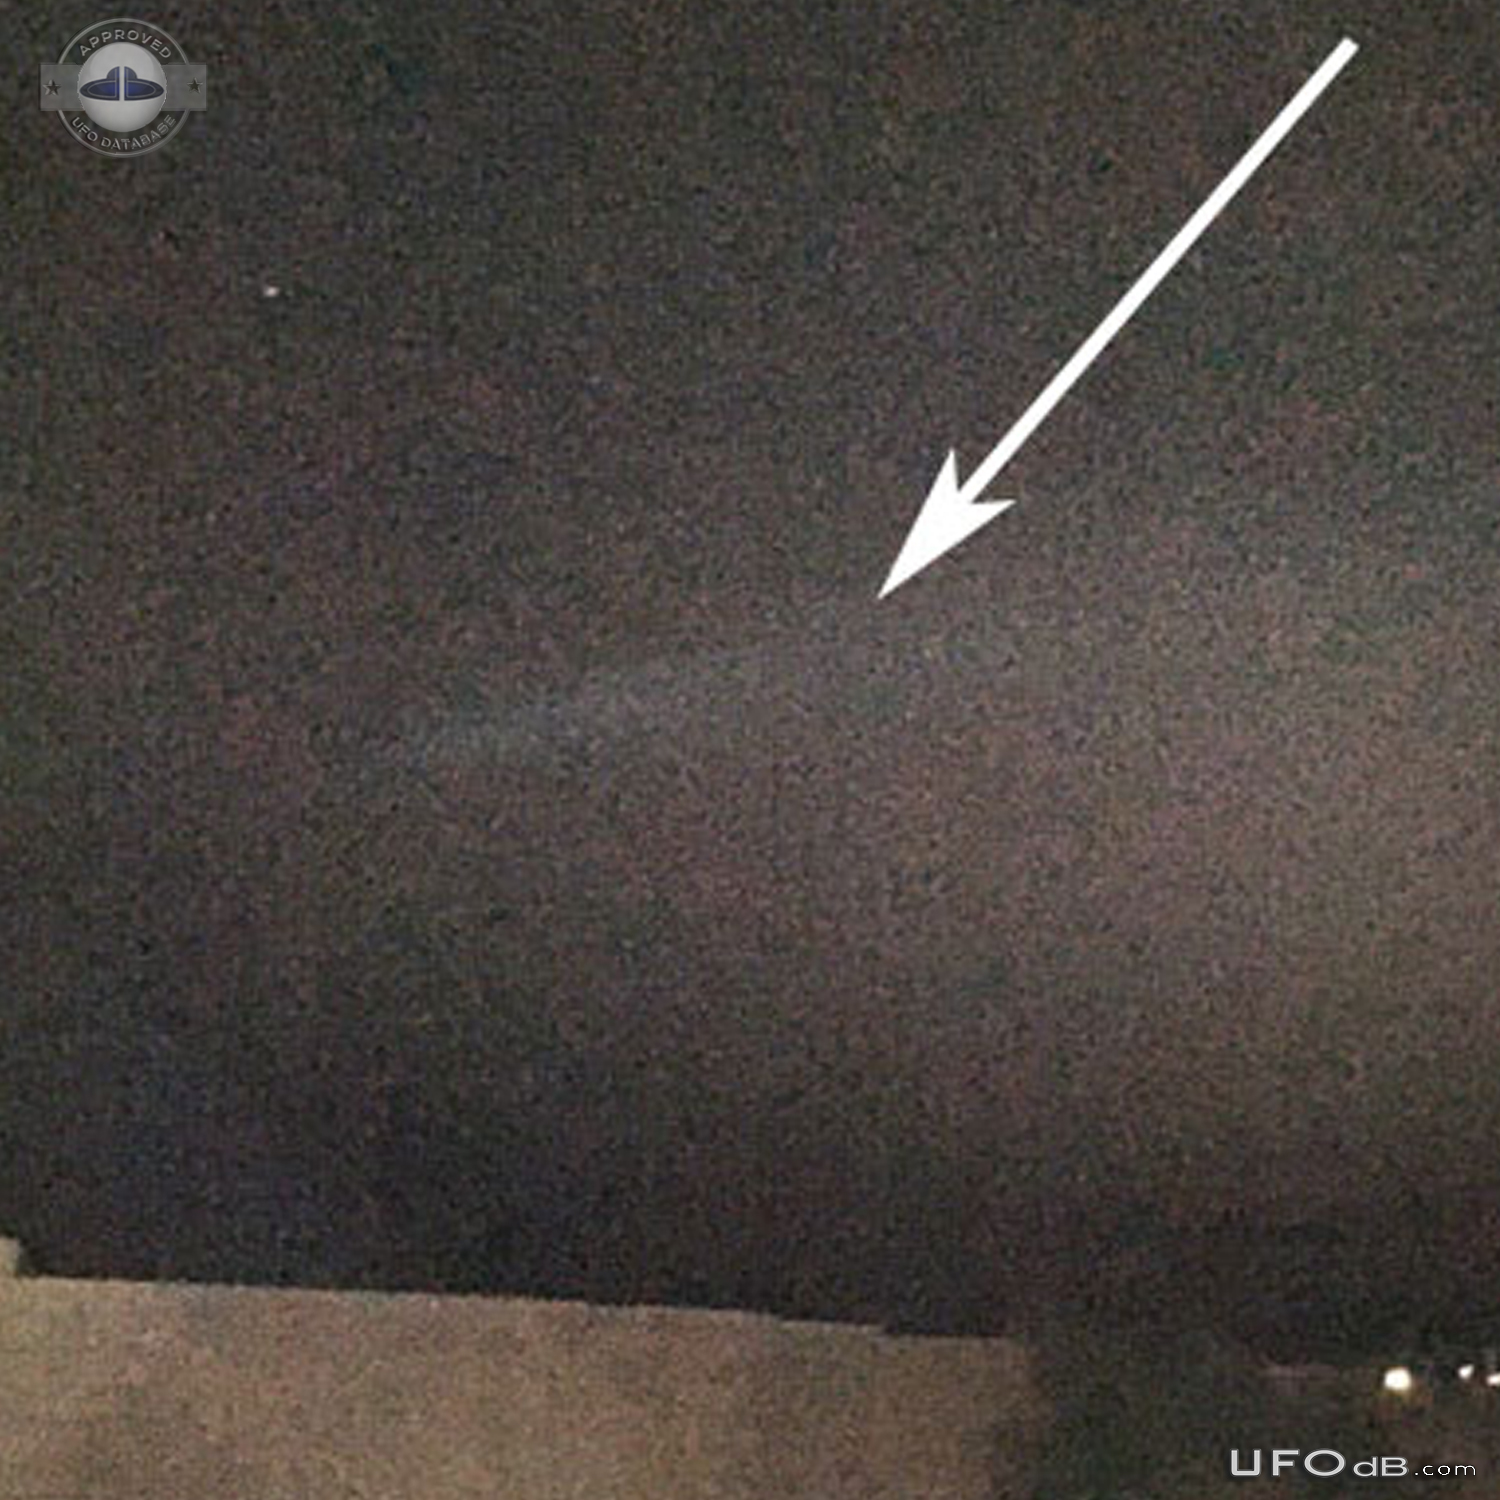 Cigar Shaped UFO With Green-Blue Mist Seen in Pahrump Nevada USA 2015 UFO Picture #759-2